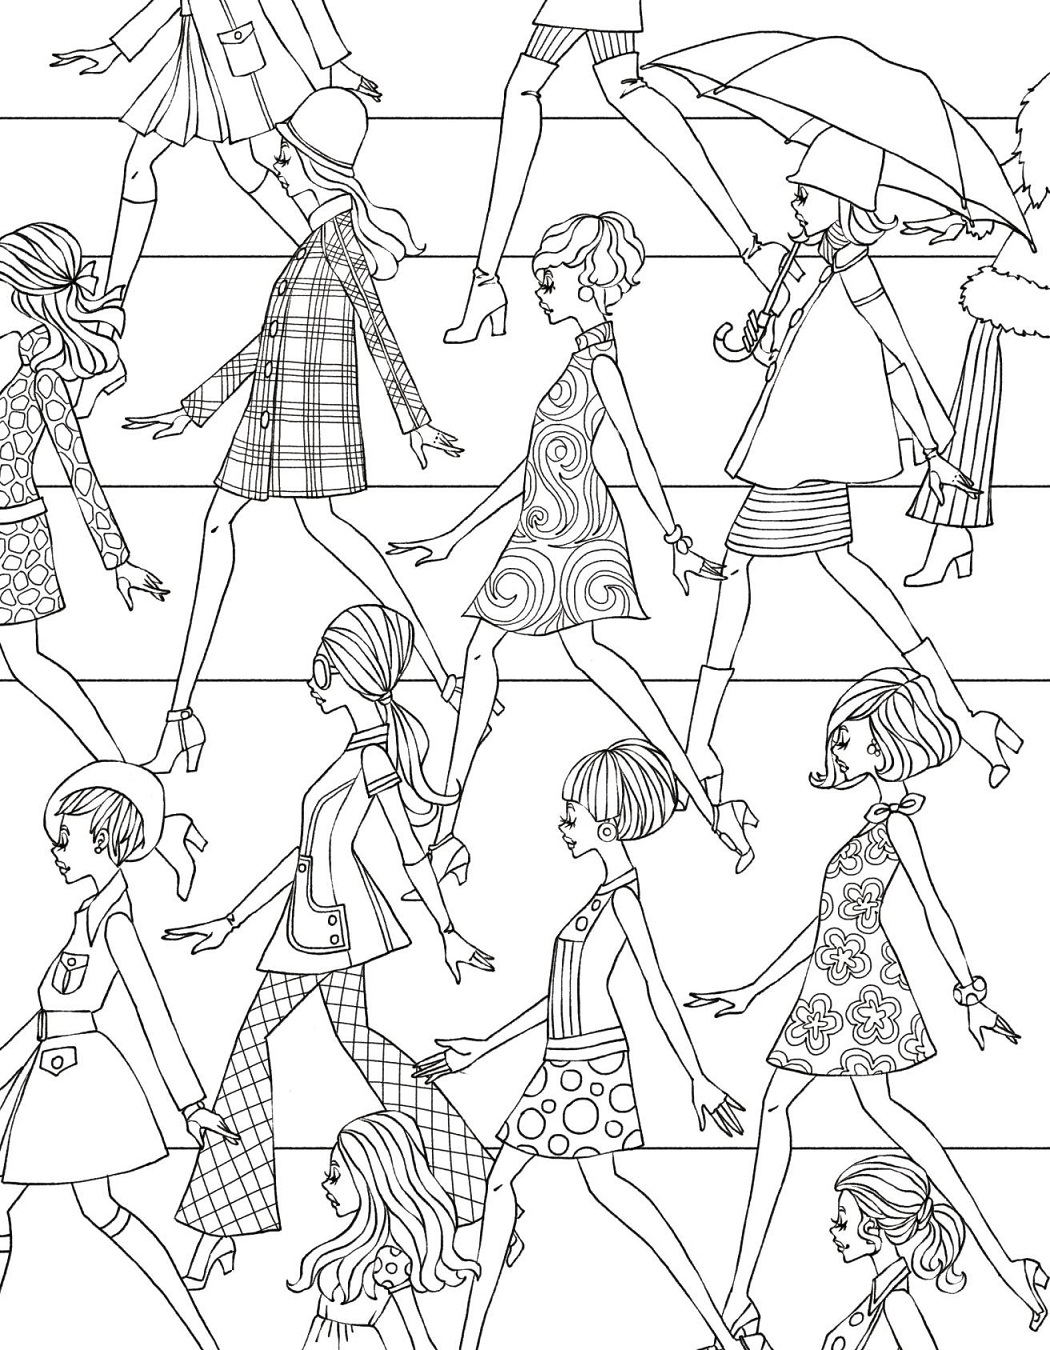 Girl Teenage Coloring Page - Free Printable Coloring Pages for Kids